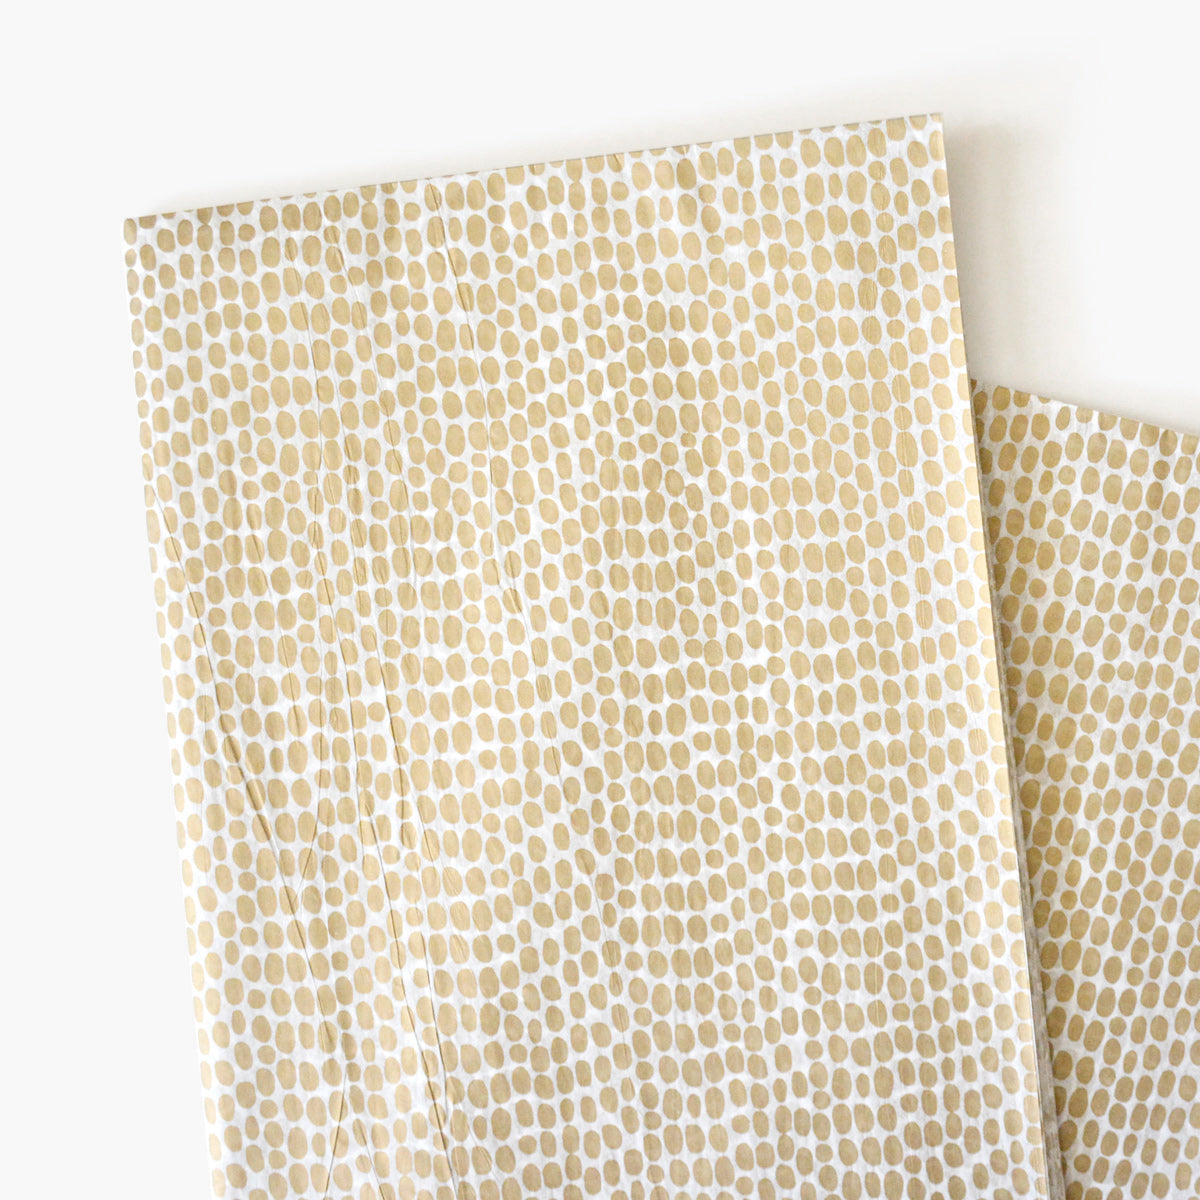 Gold Pebbles Patterned Tissue Paper